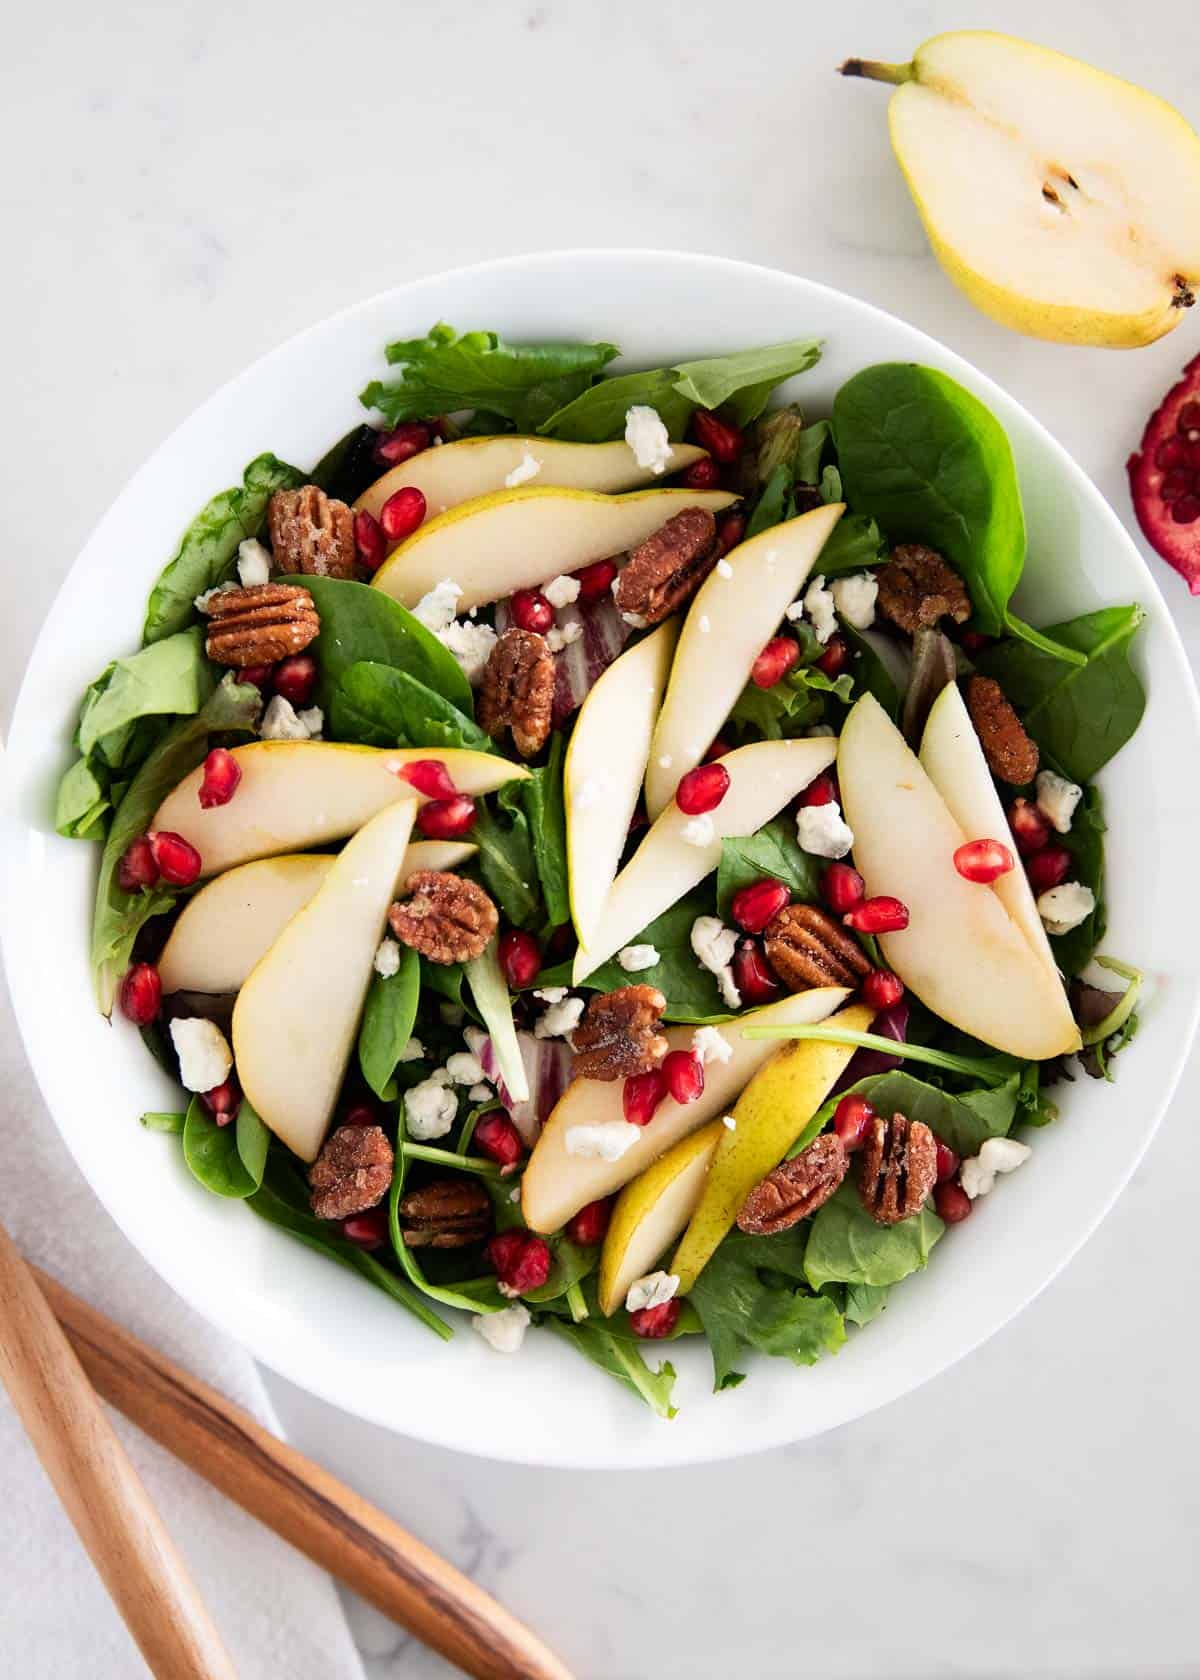 A salad made with pears, nuts and greens.